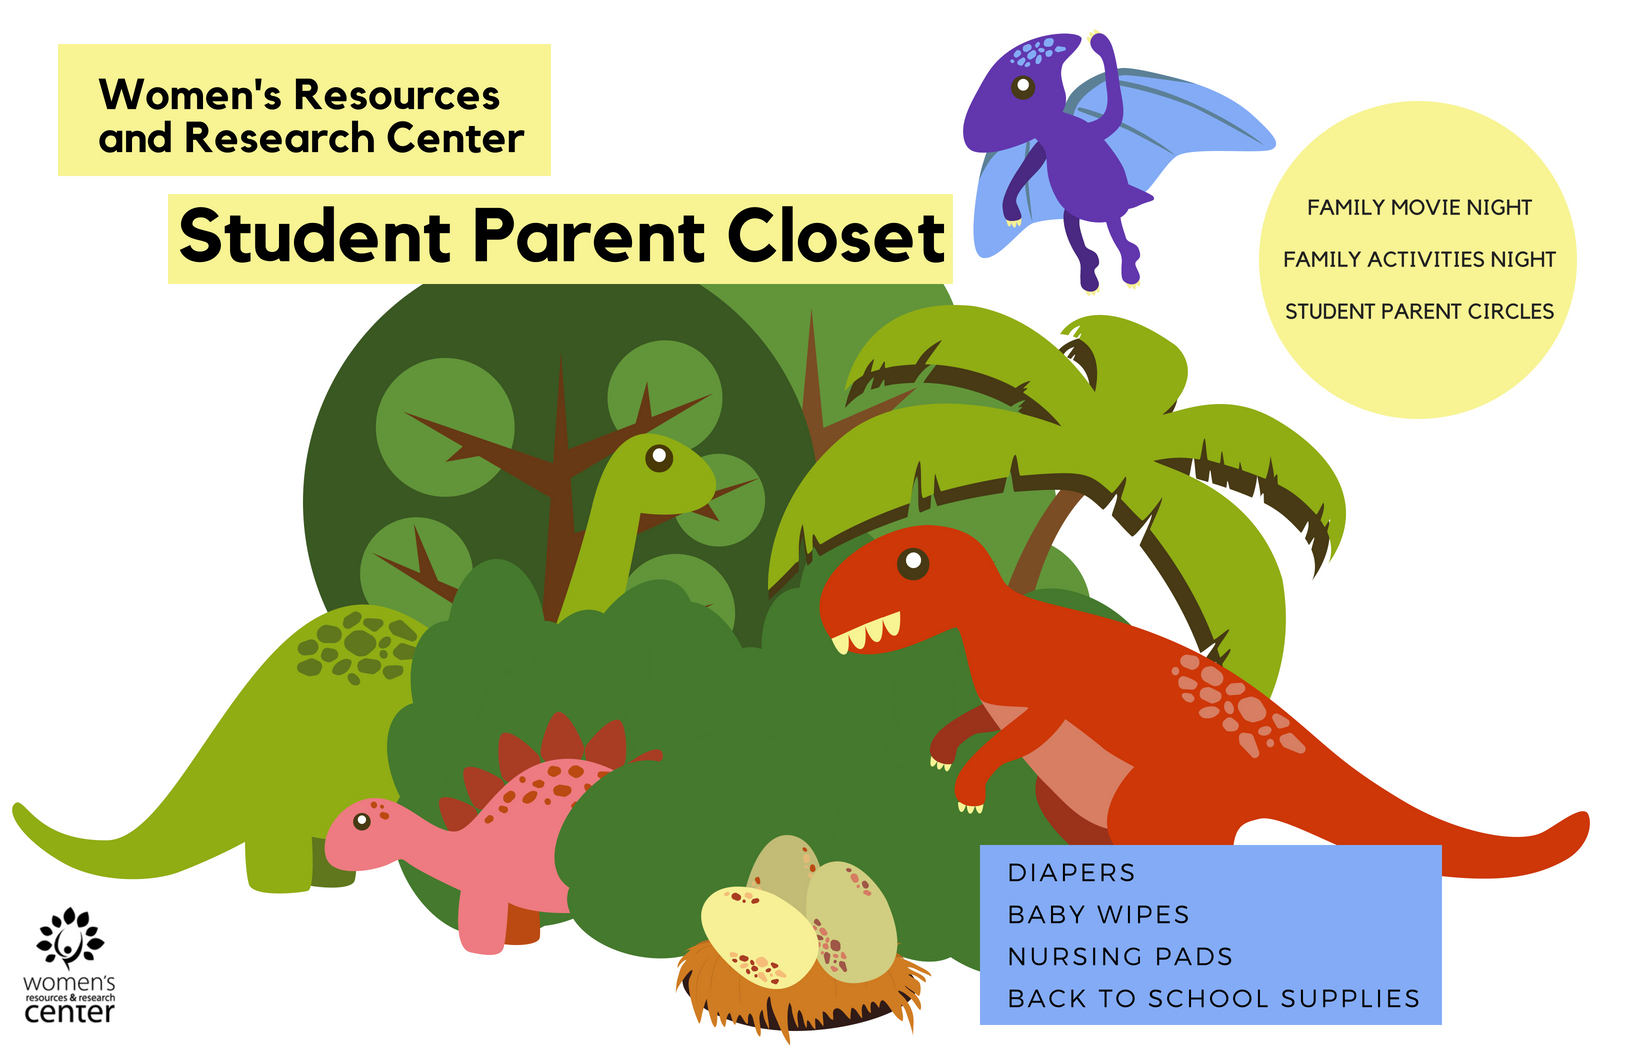 Student parent closet flyer with dinosaurs, trees and a nest of eggs